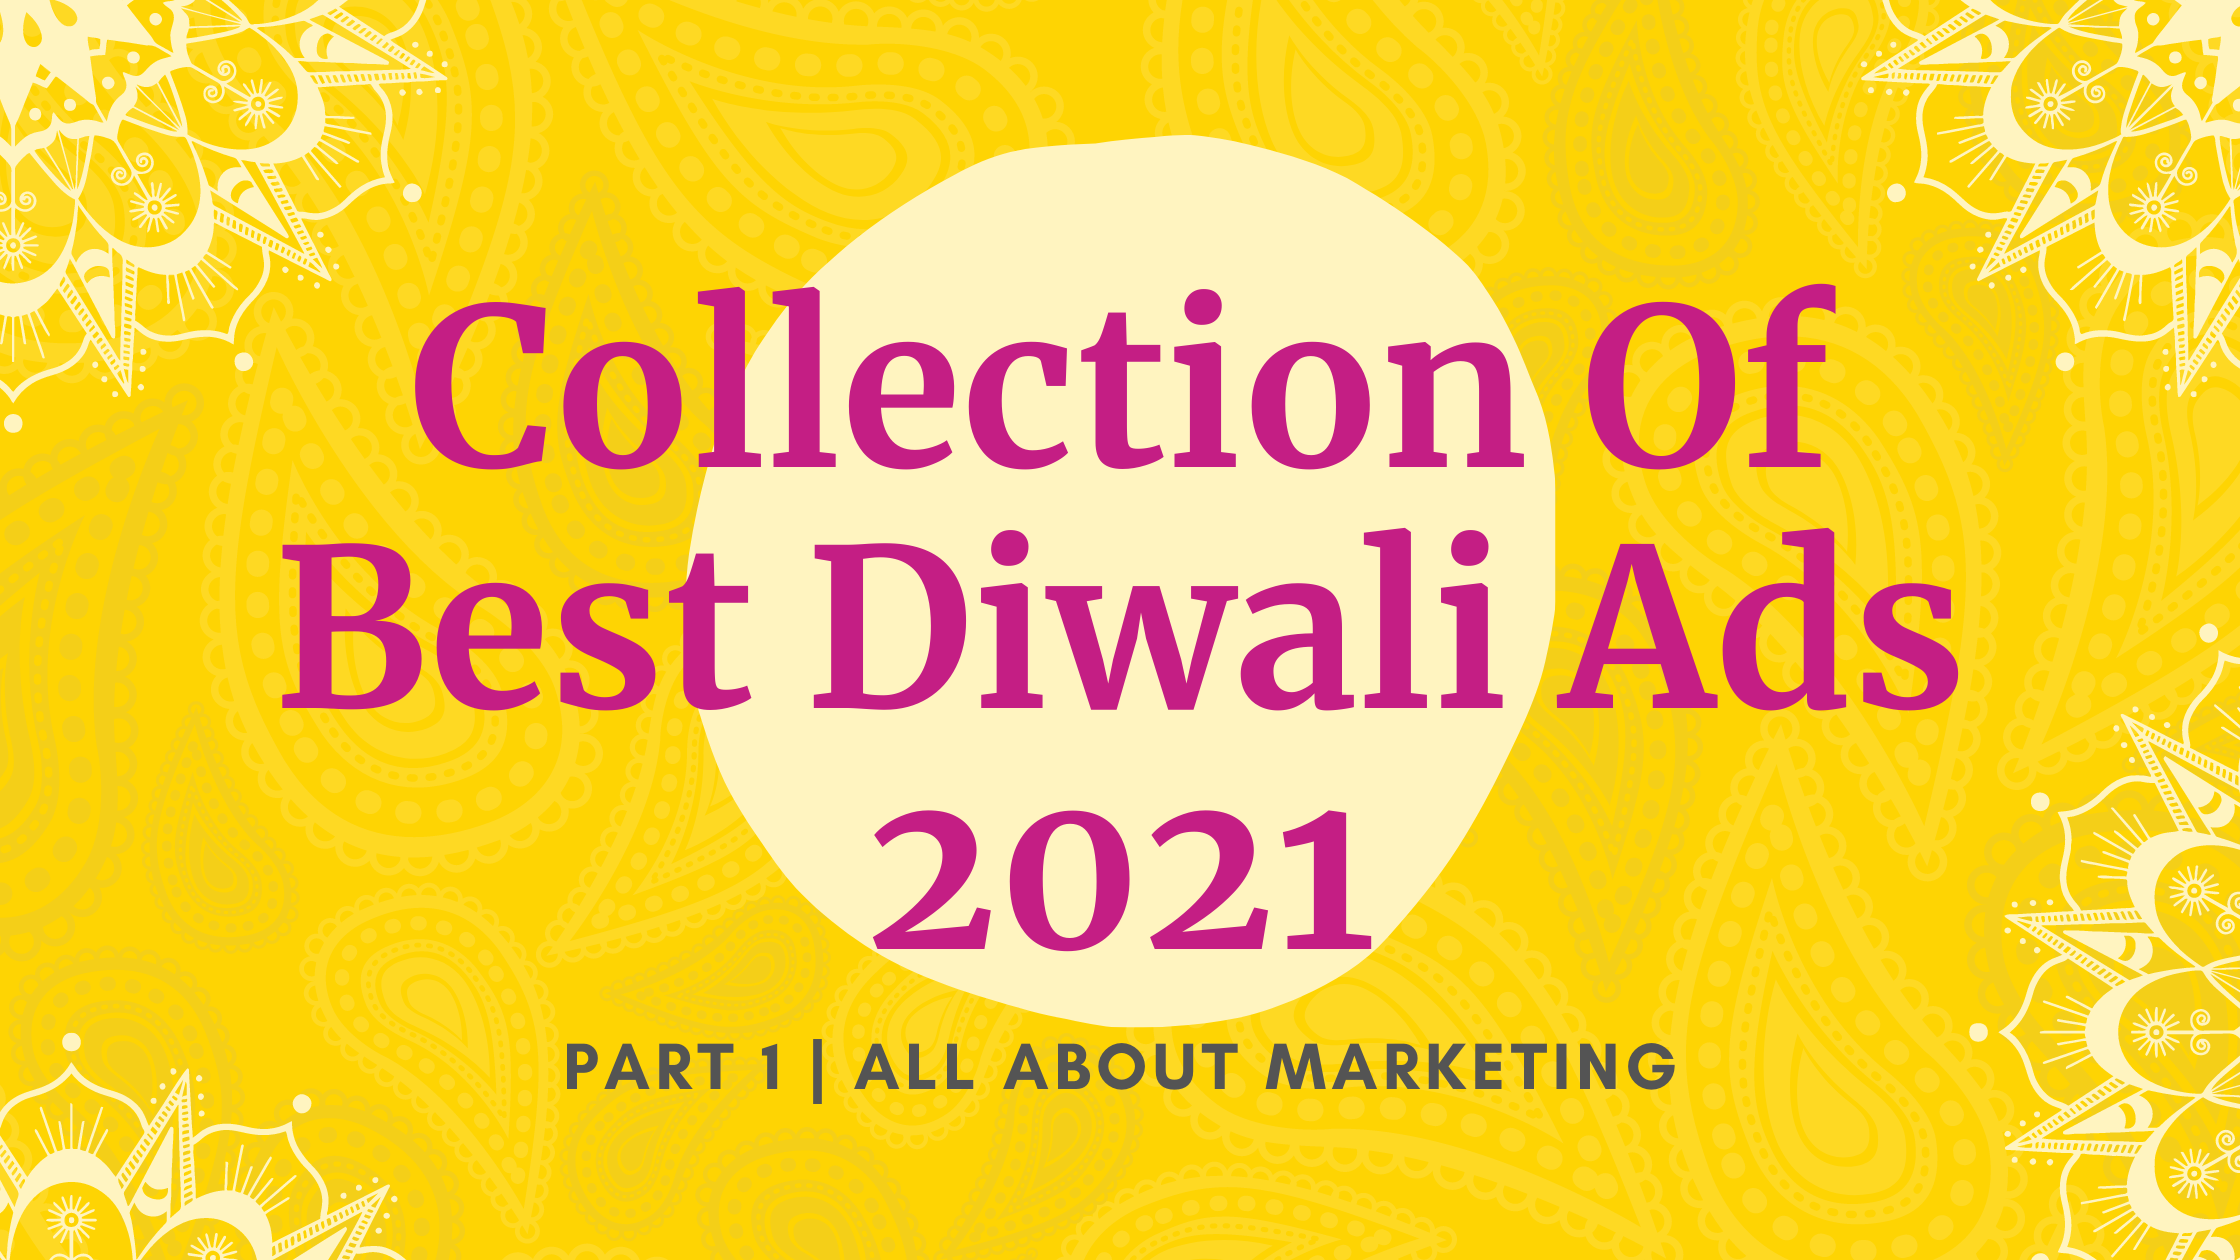 Collection Of Best Diwali Ads 2021